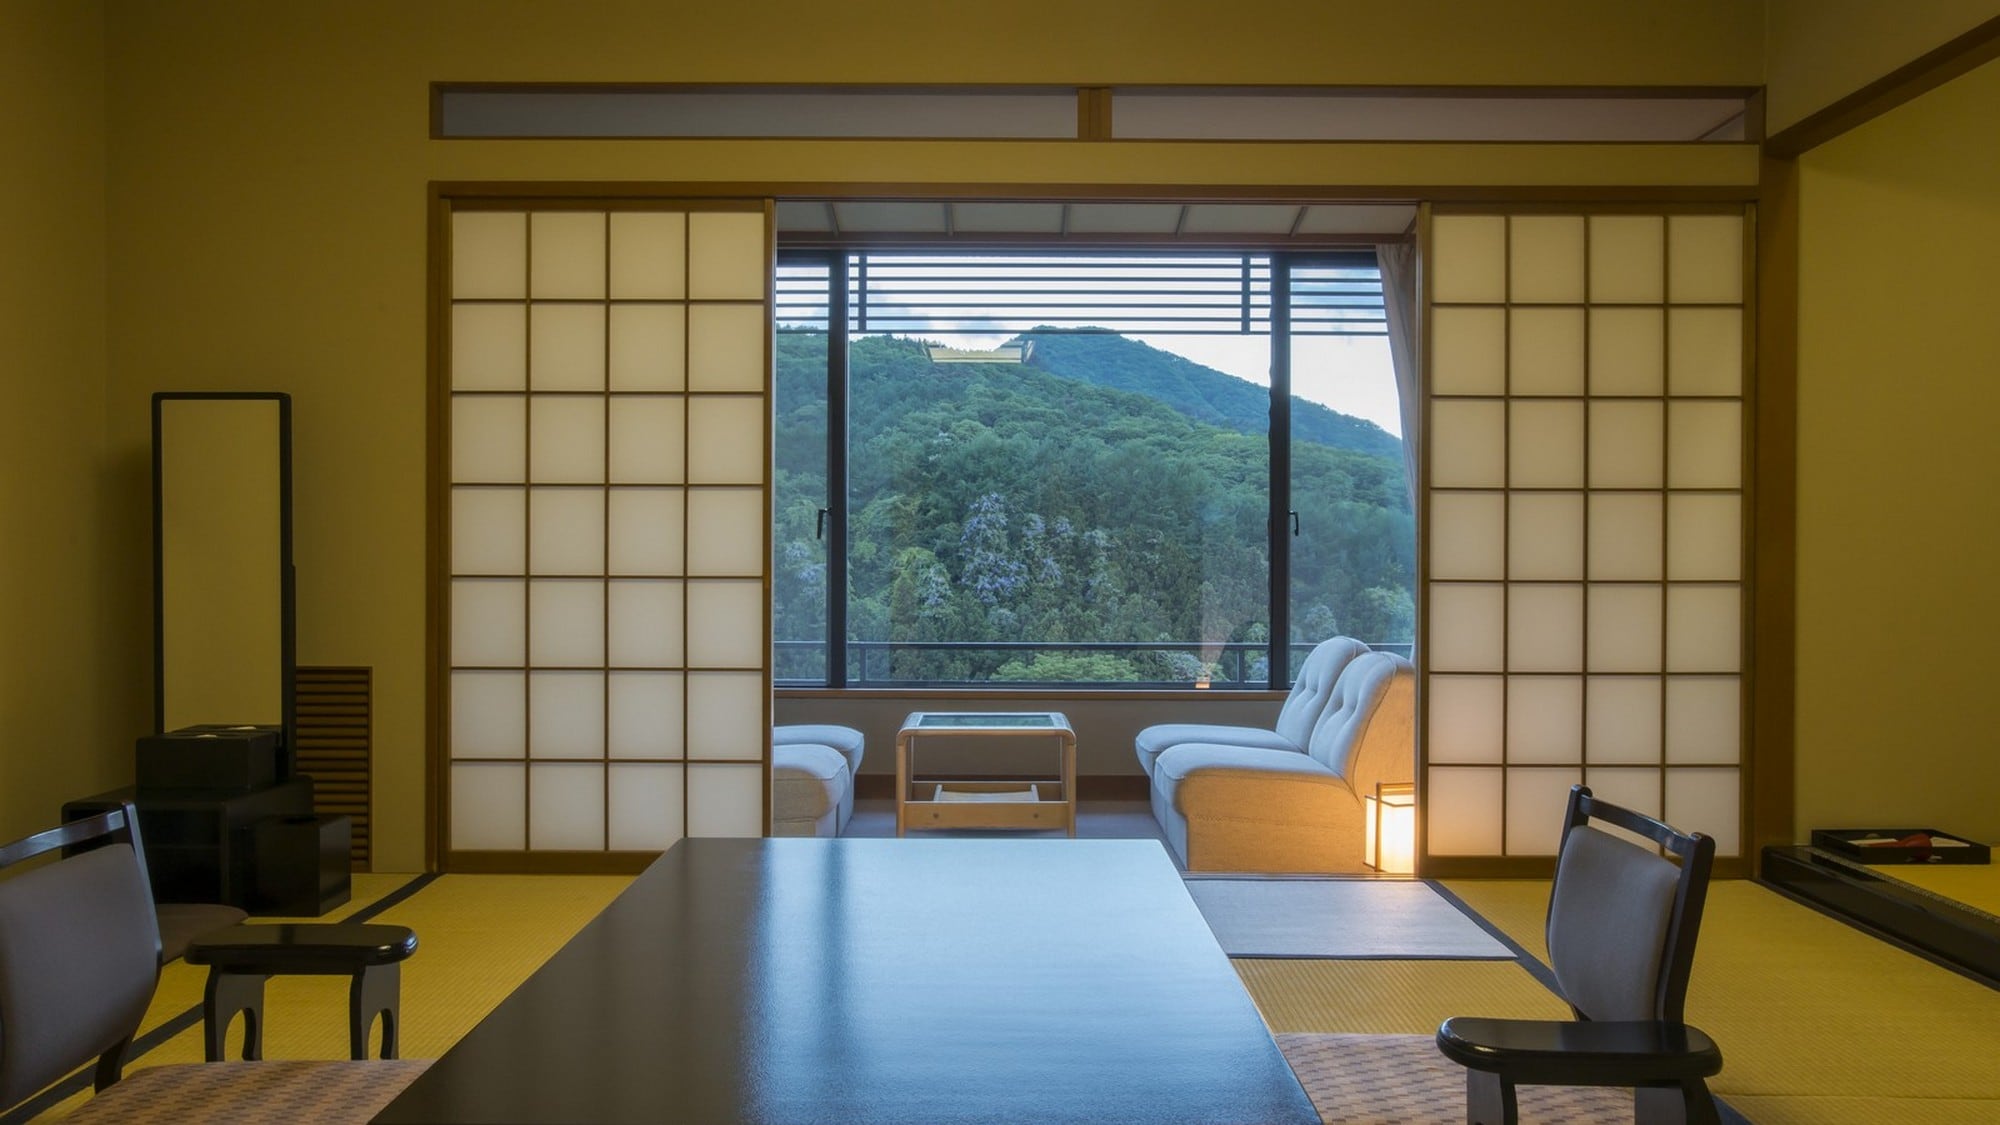 All basic guest rooms are 12.5 tatami mats. There is a sofa table for 4 people so you can spend a relaxing time.